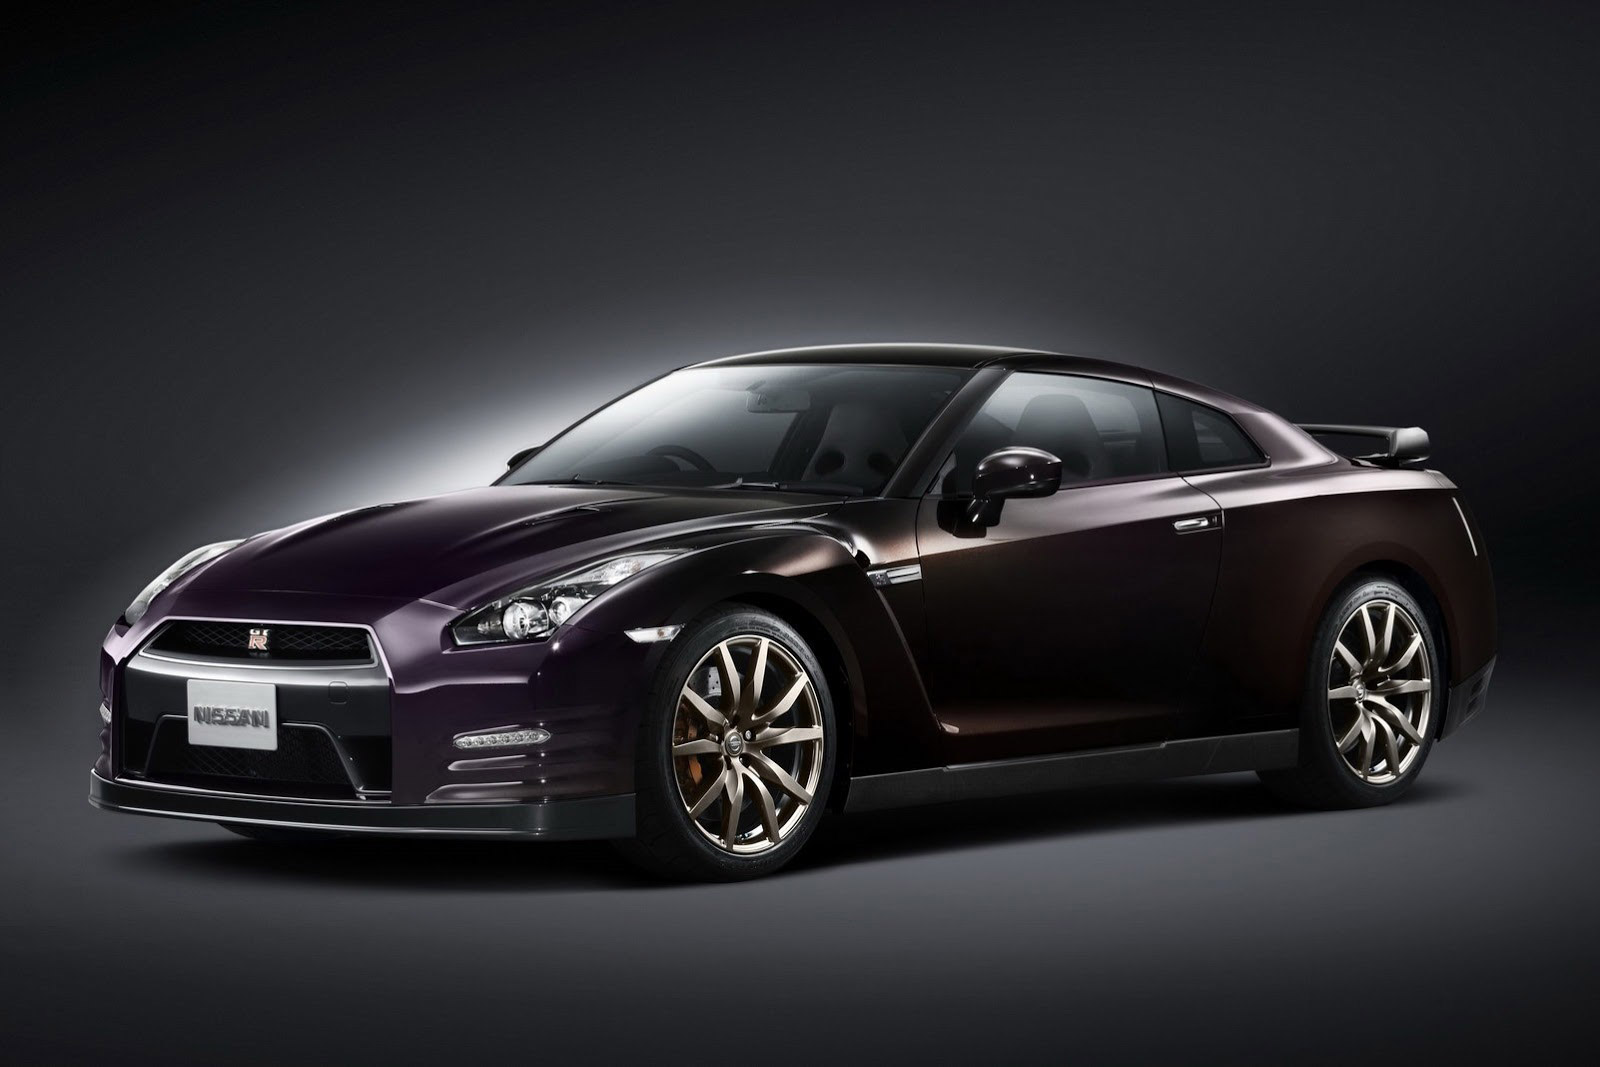 Nissan Gt R Midnight Opal Edition Limited To 100 Units Worldwide